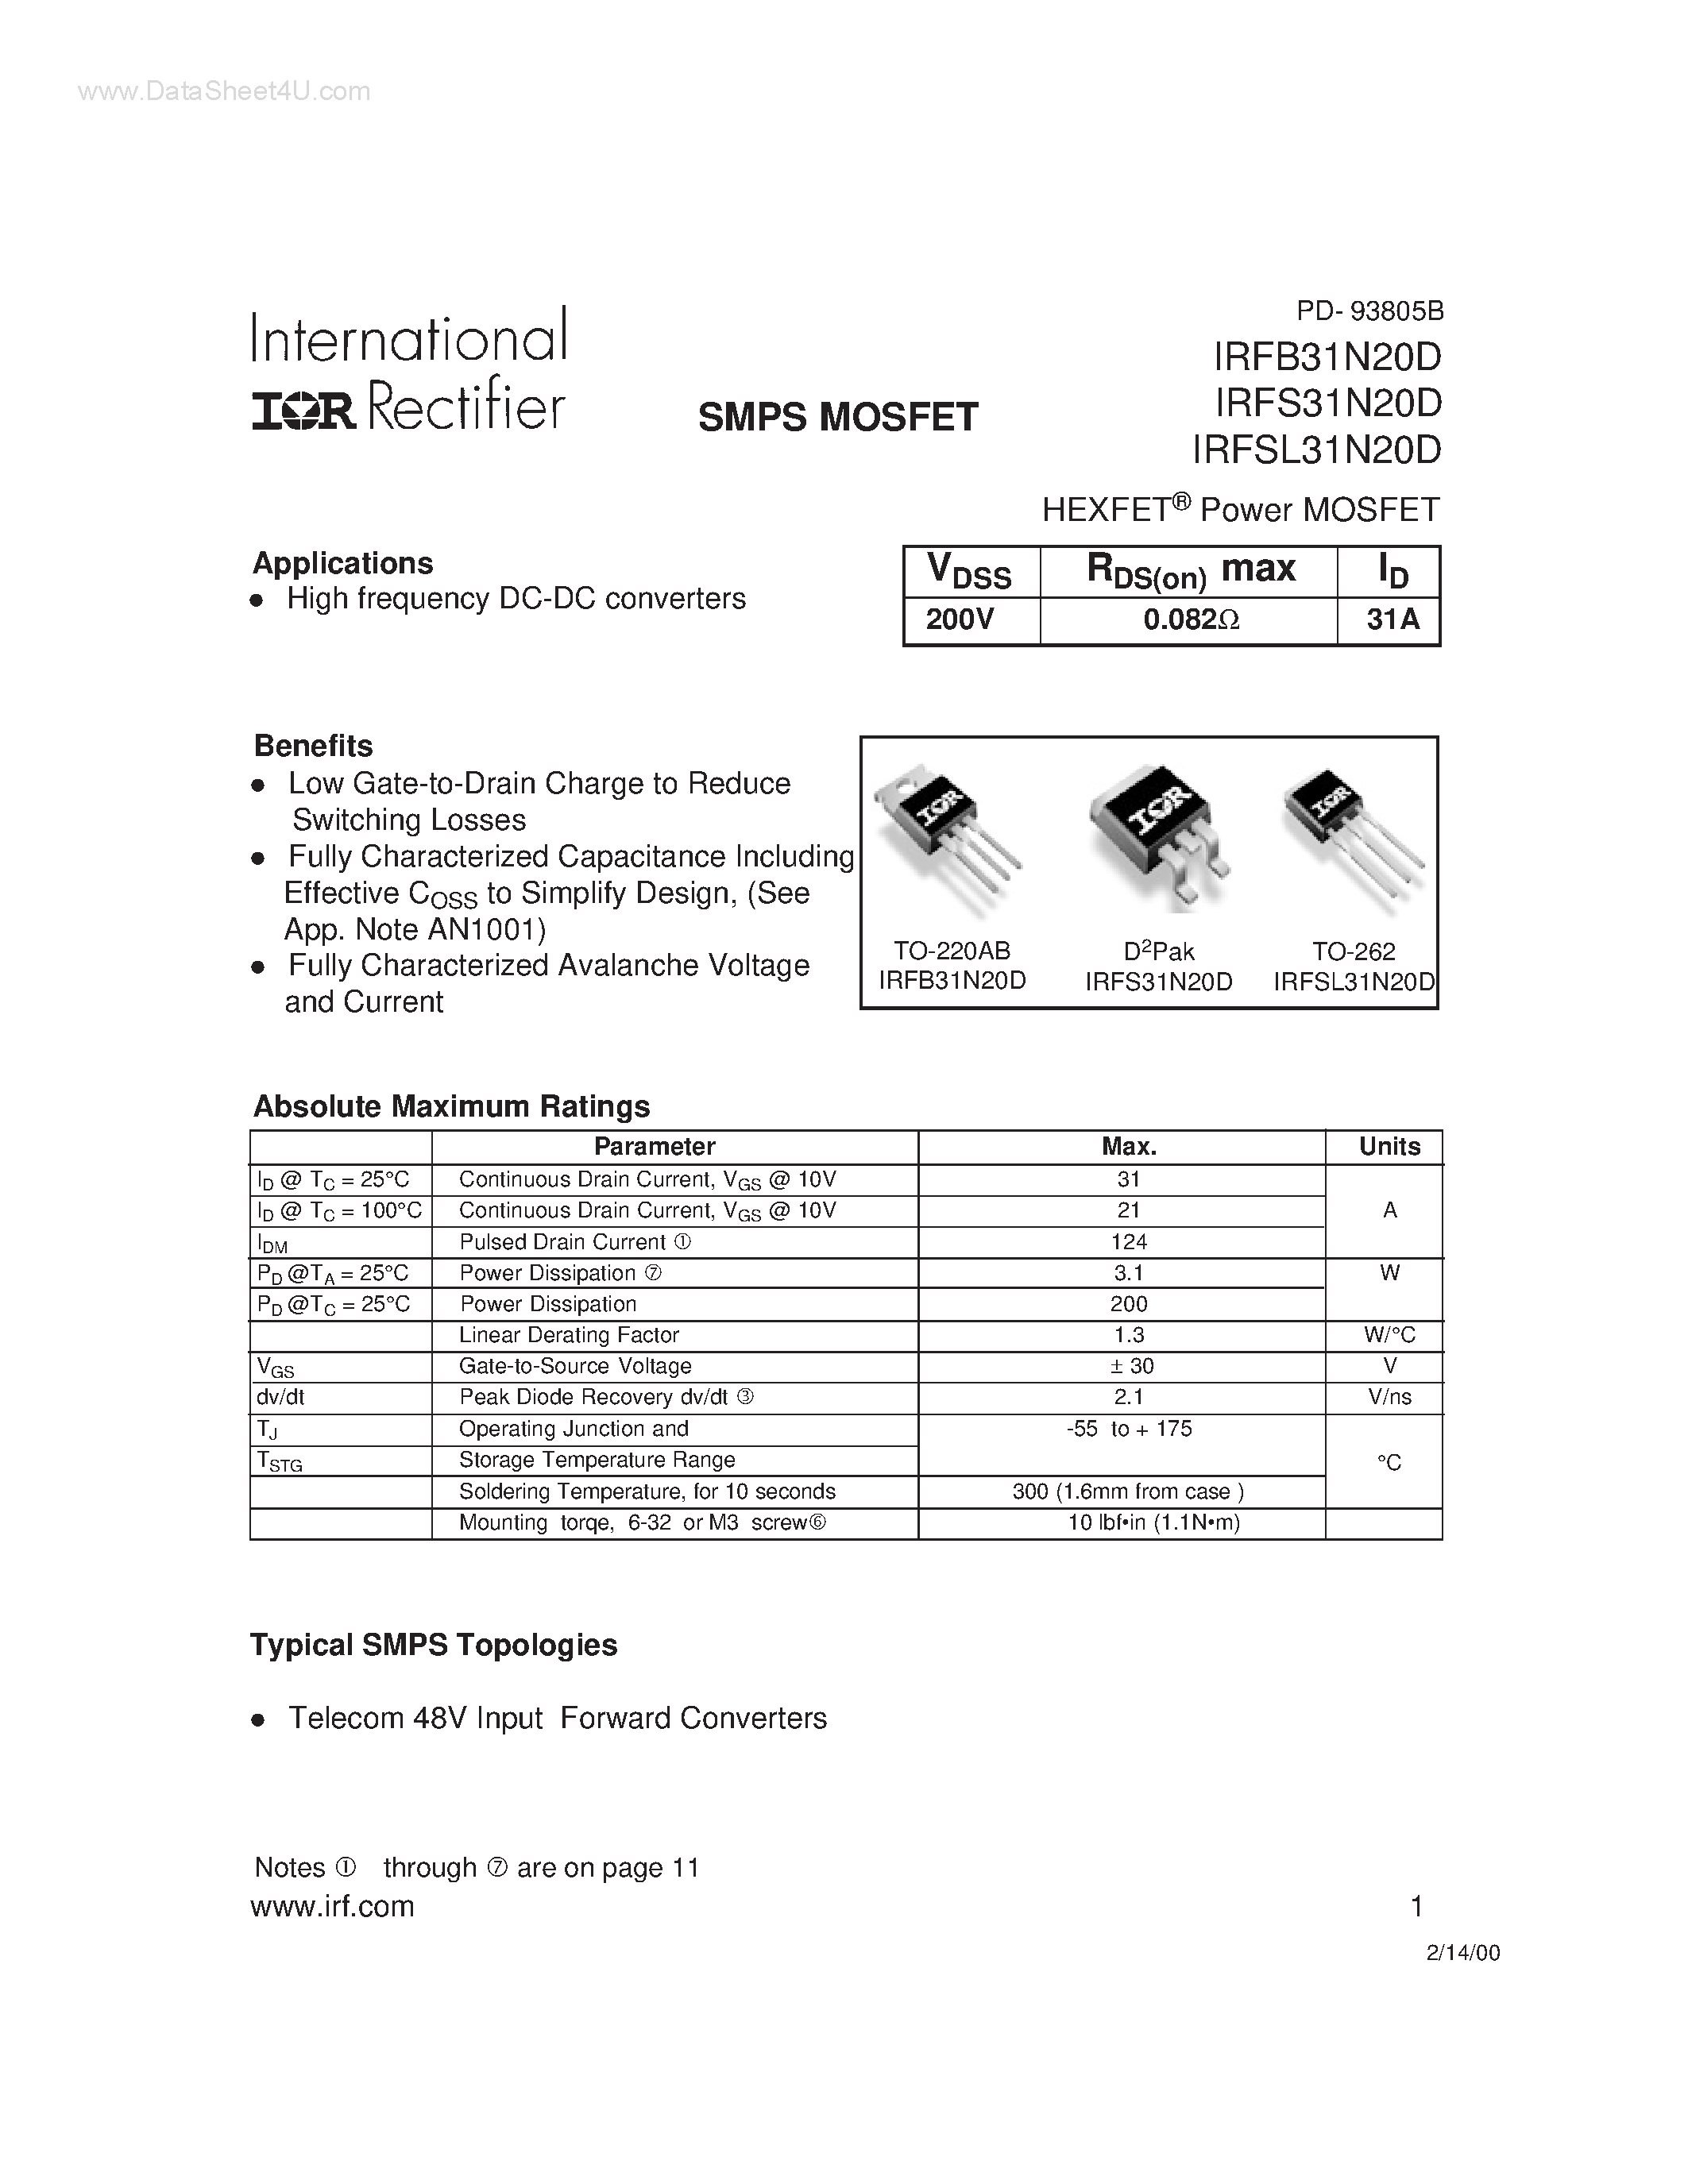 Datasheet FB31N20D - Search -----> IRFB31N20D page 1